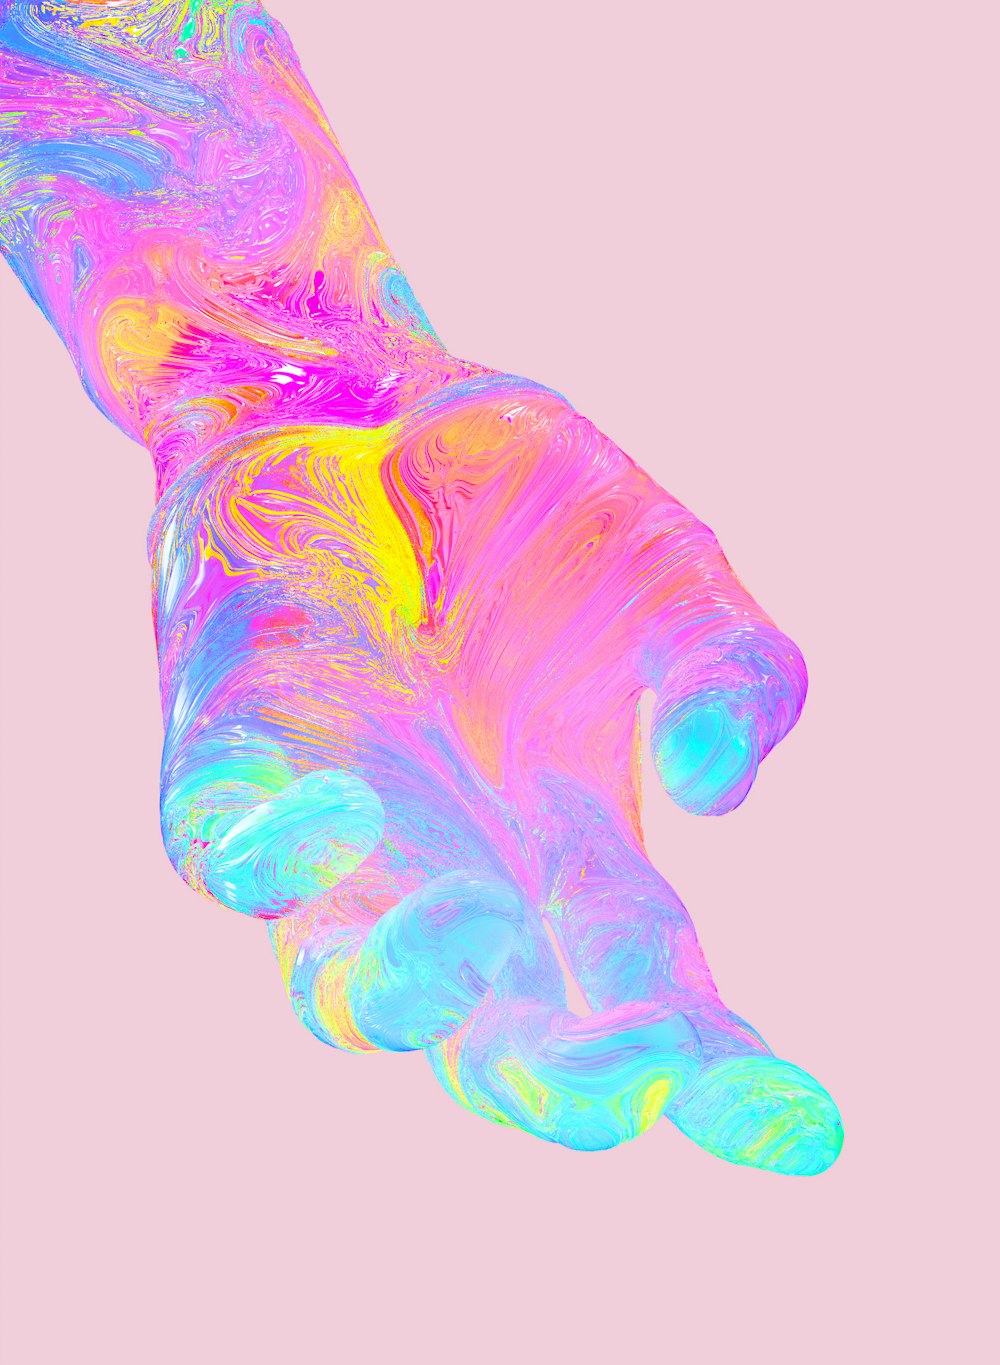 a pink and blue painting of a person's hand